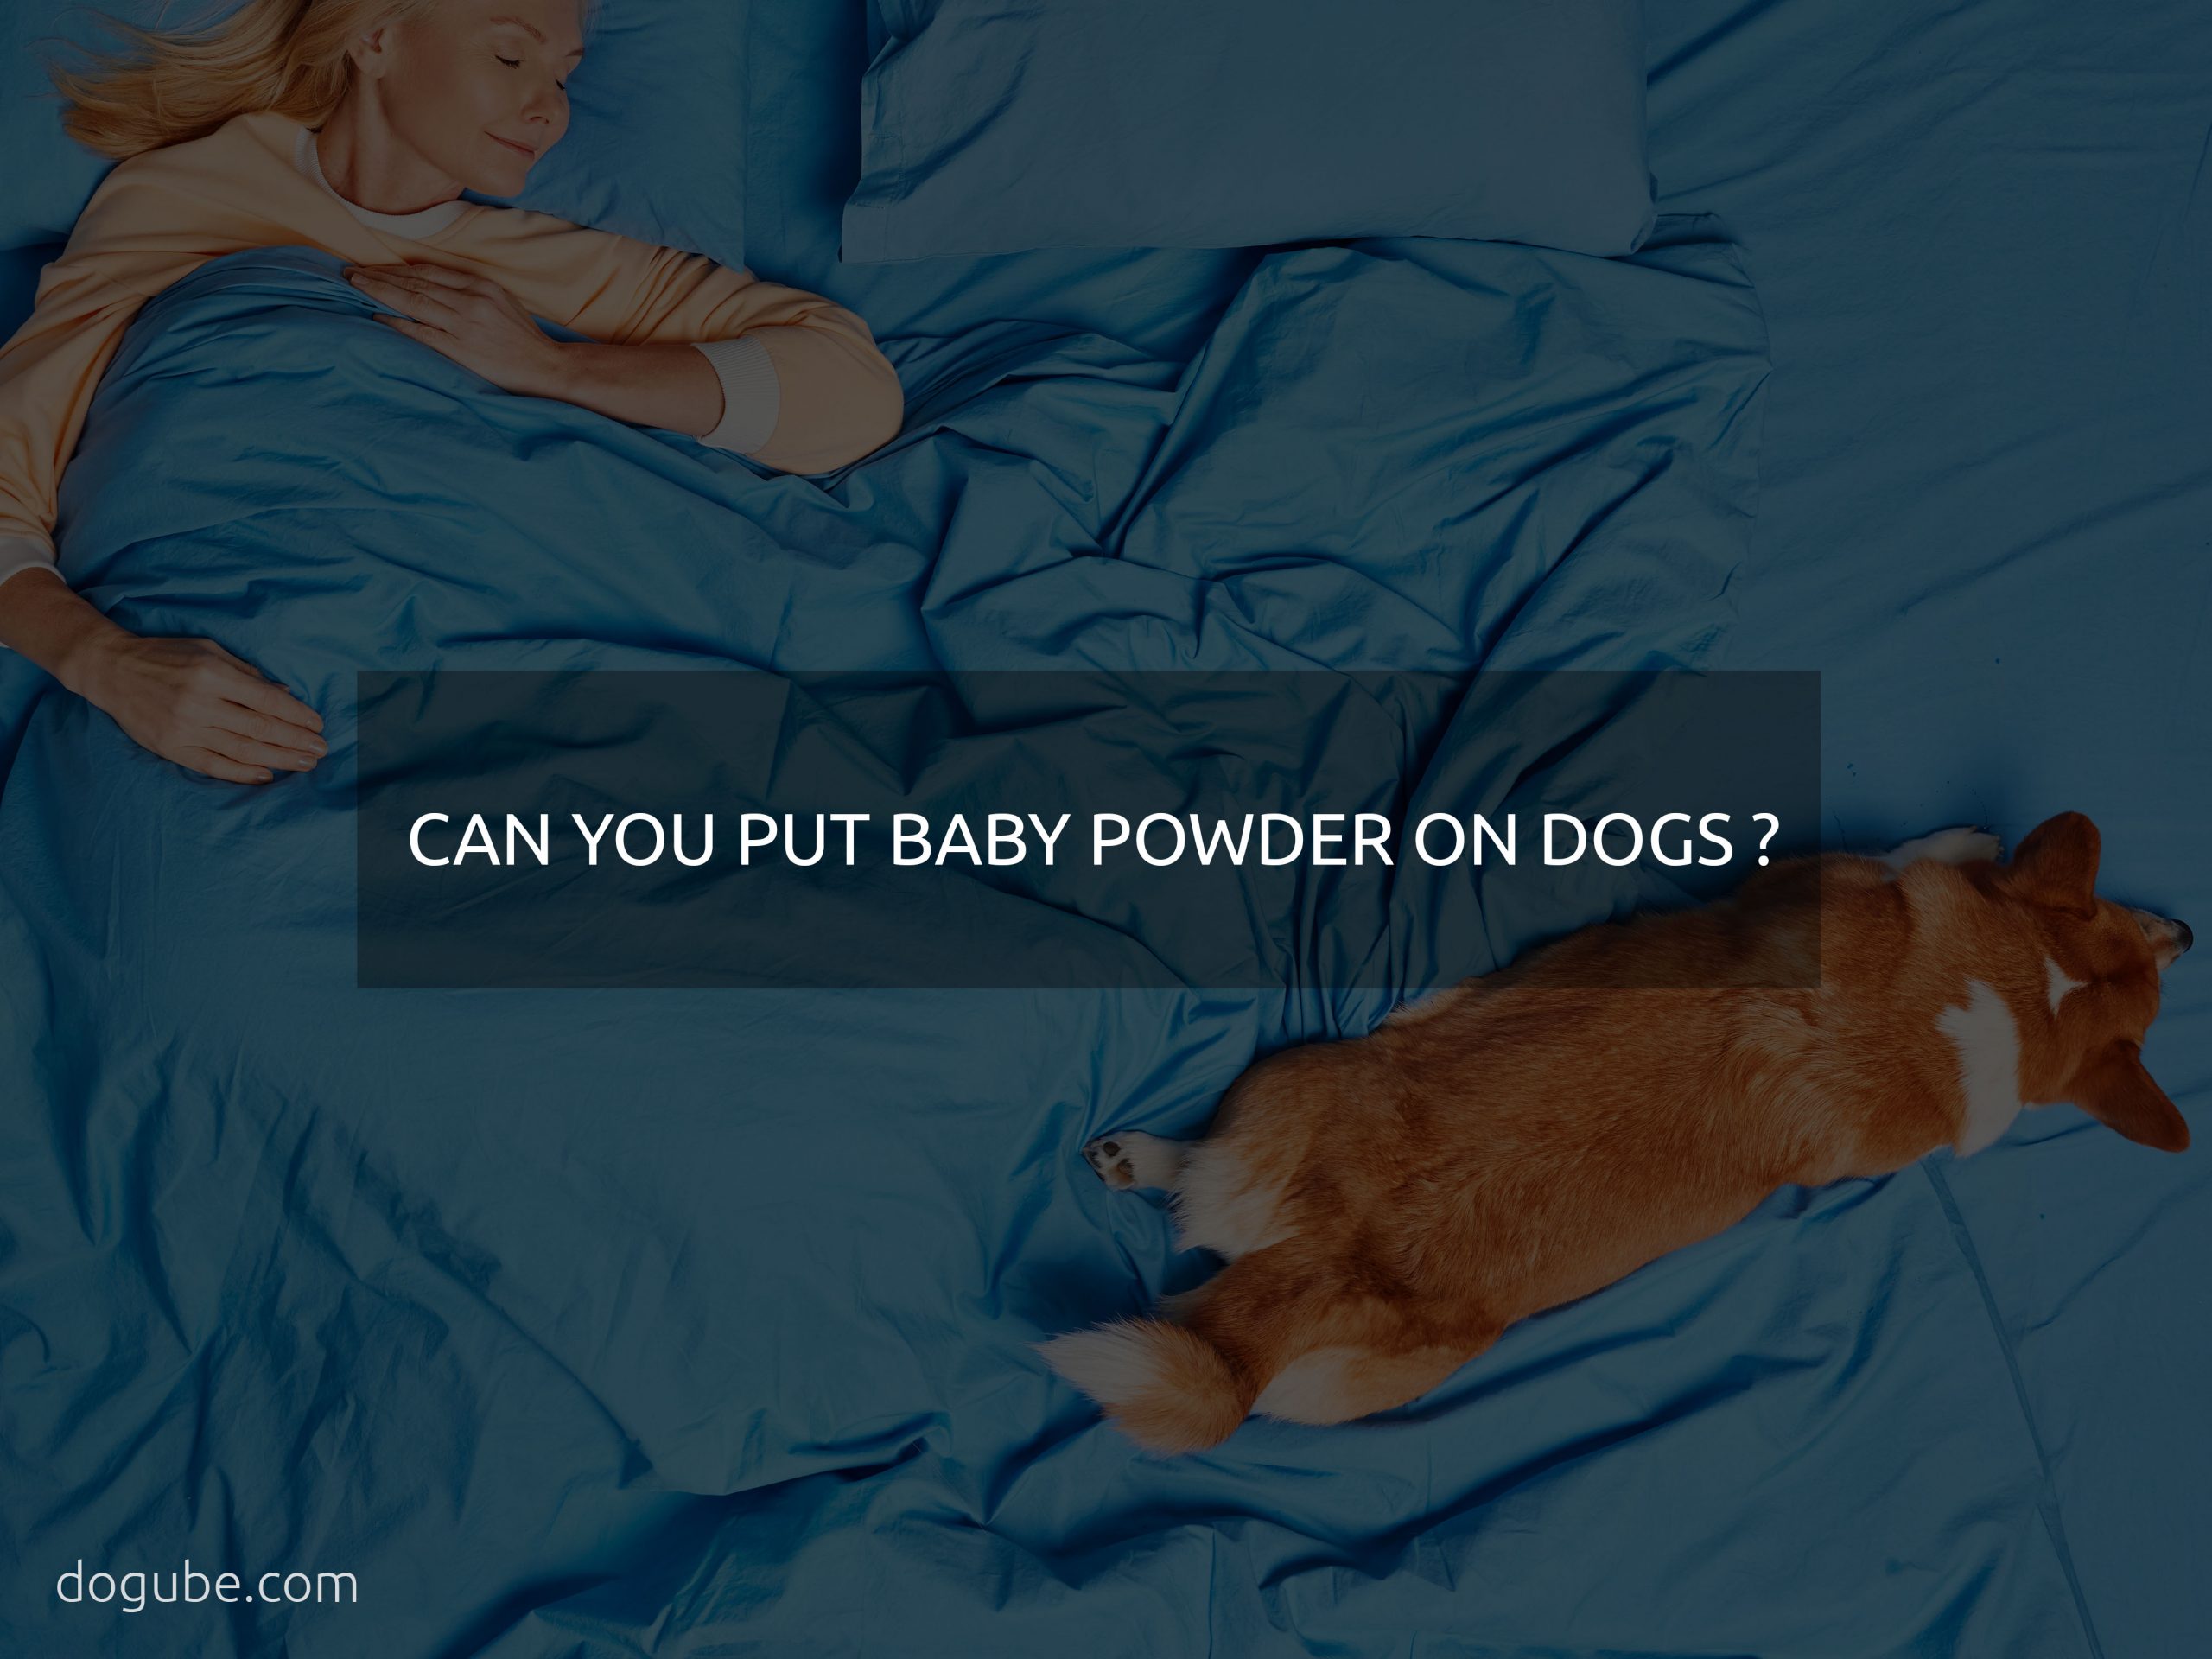 dog sounds congested when sleeping ?